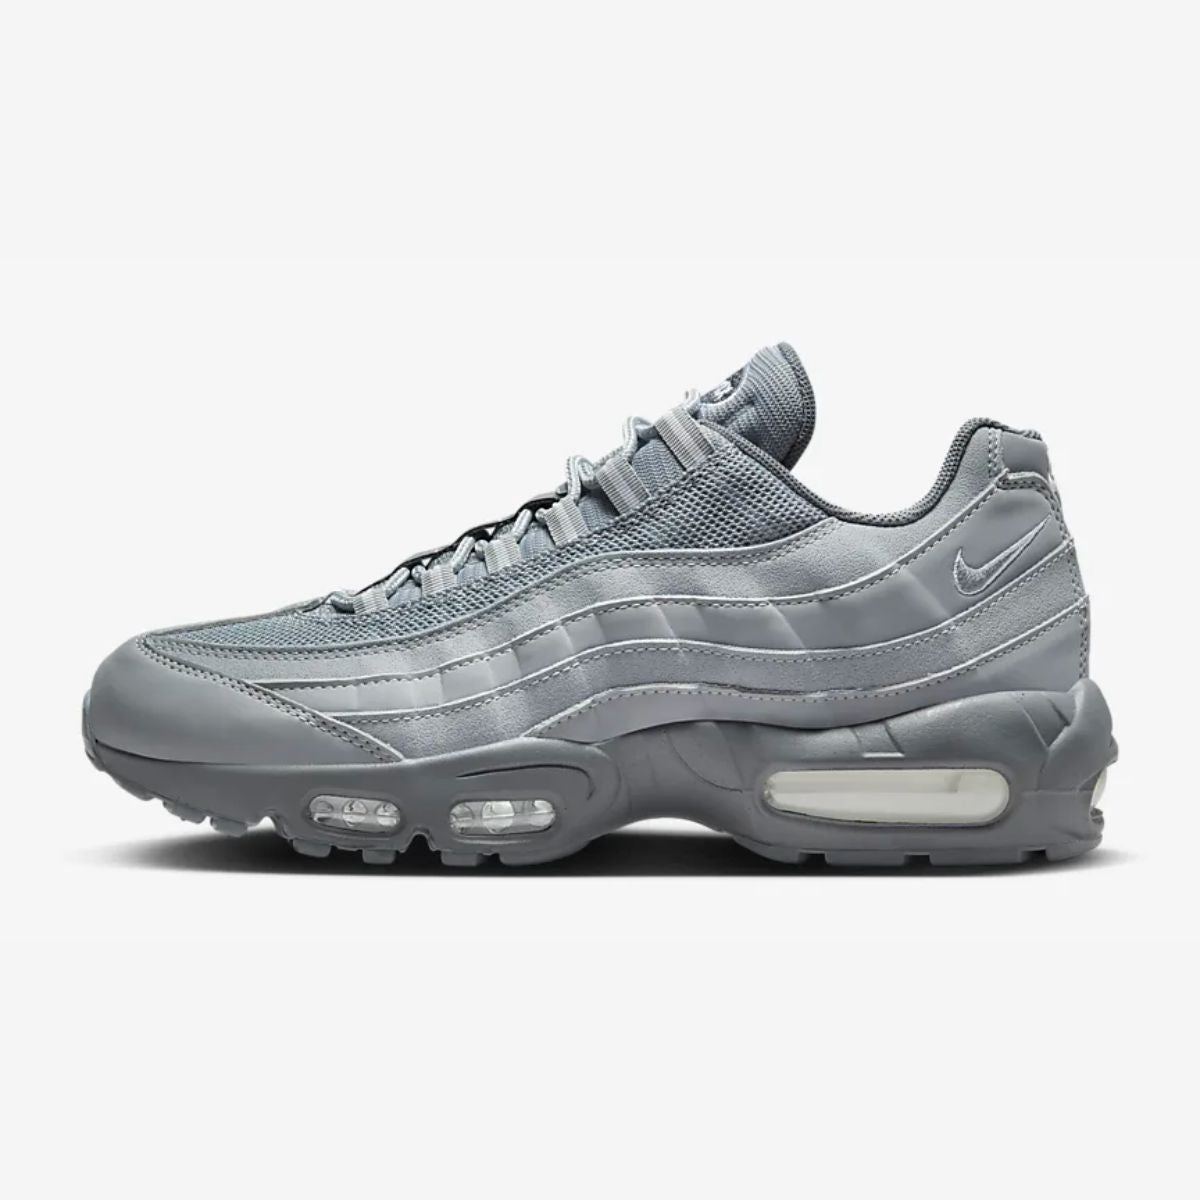 Air Max 95 Replacement Shoelaces